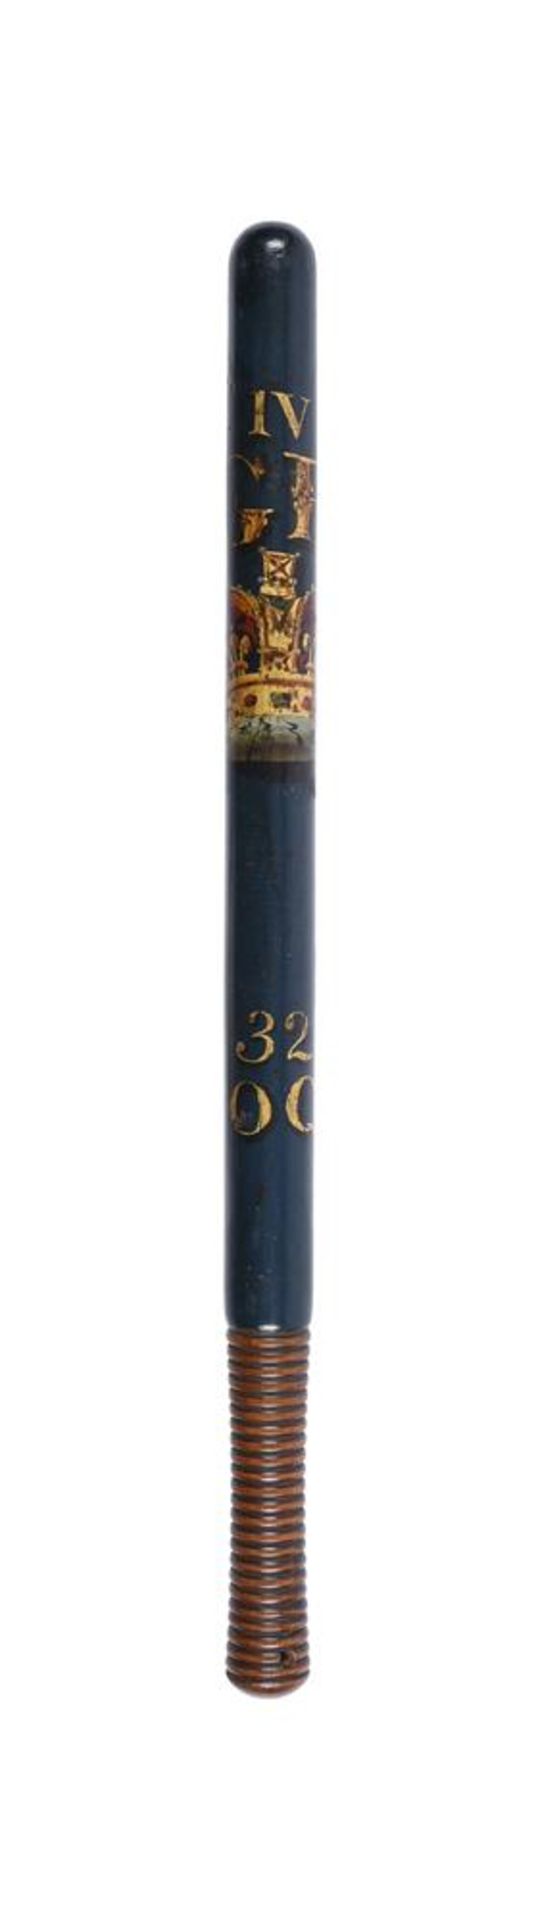 A GEORGE IV PAINTED WOOD TRUNCHEONCIRCA 1830Decorated with IV GR above a painted crown and text 32